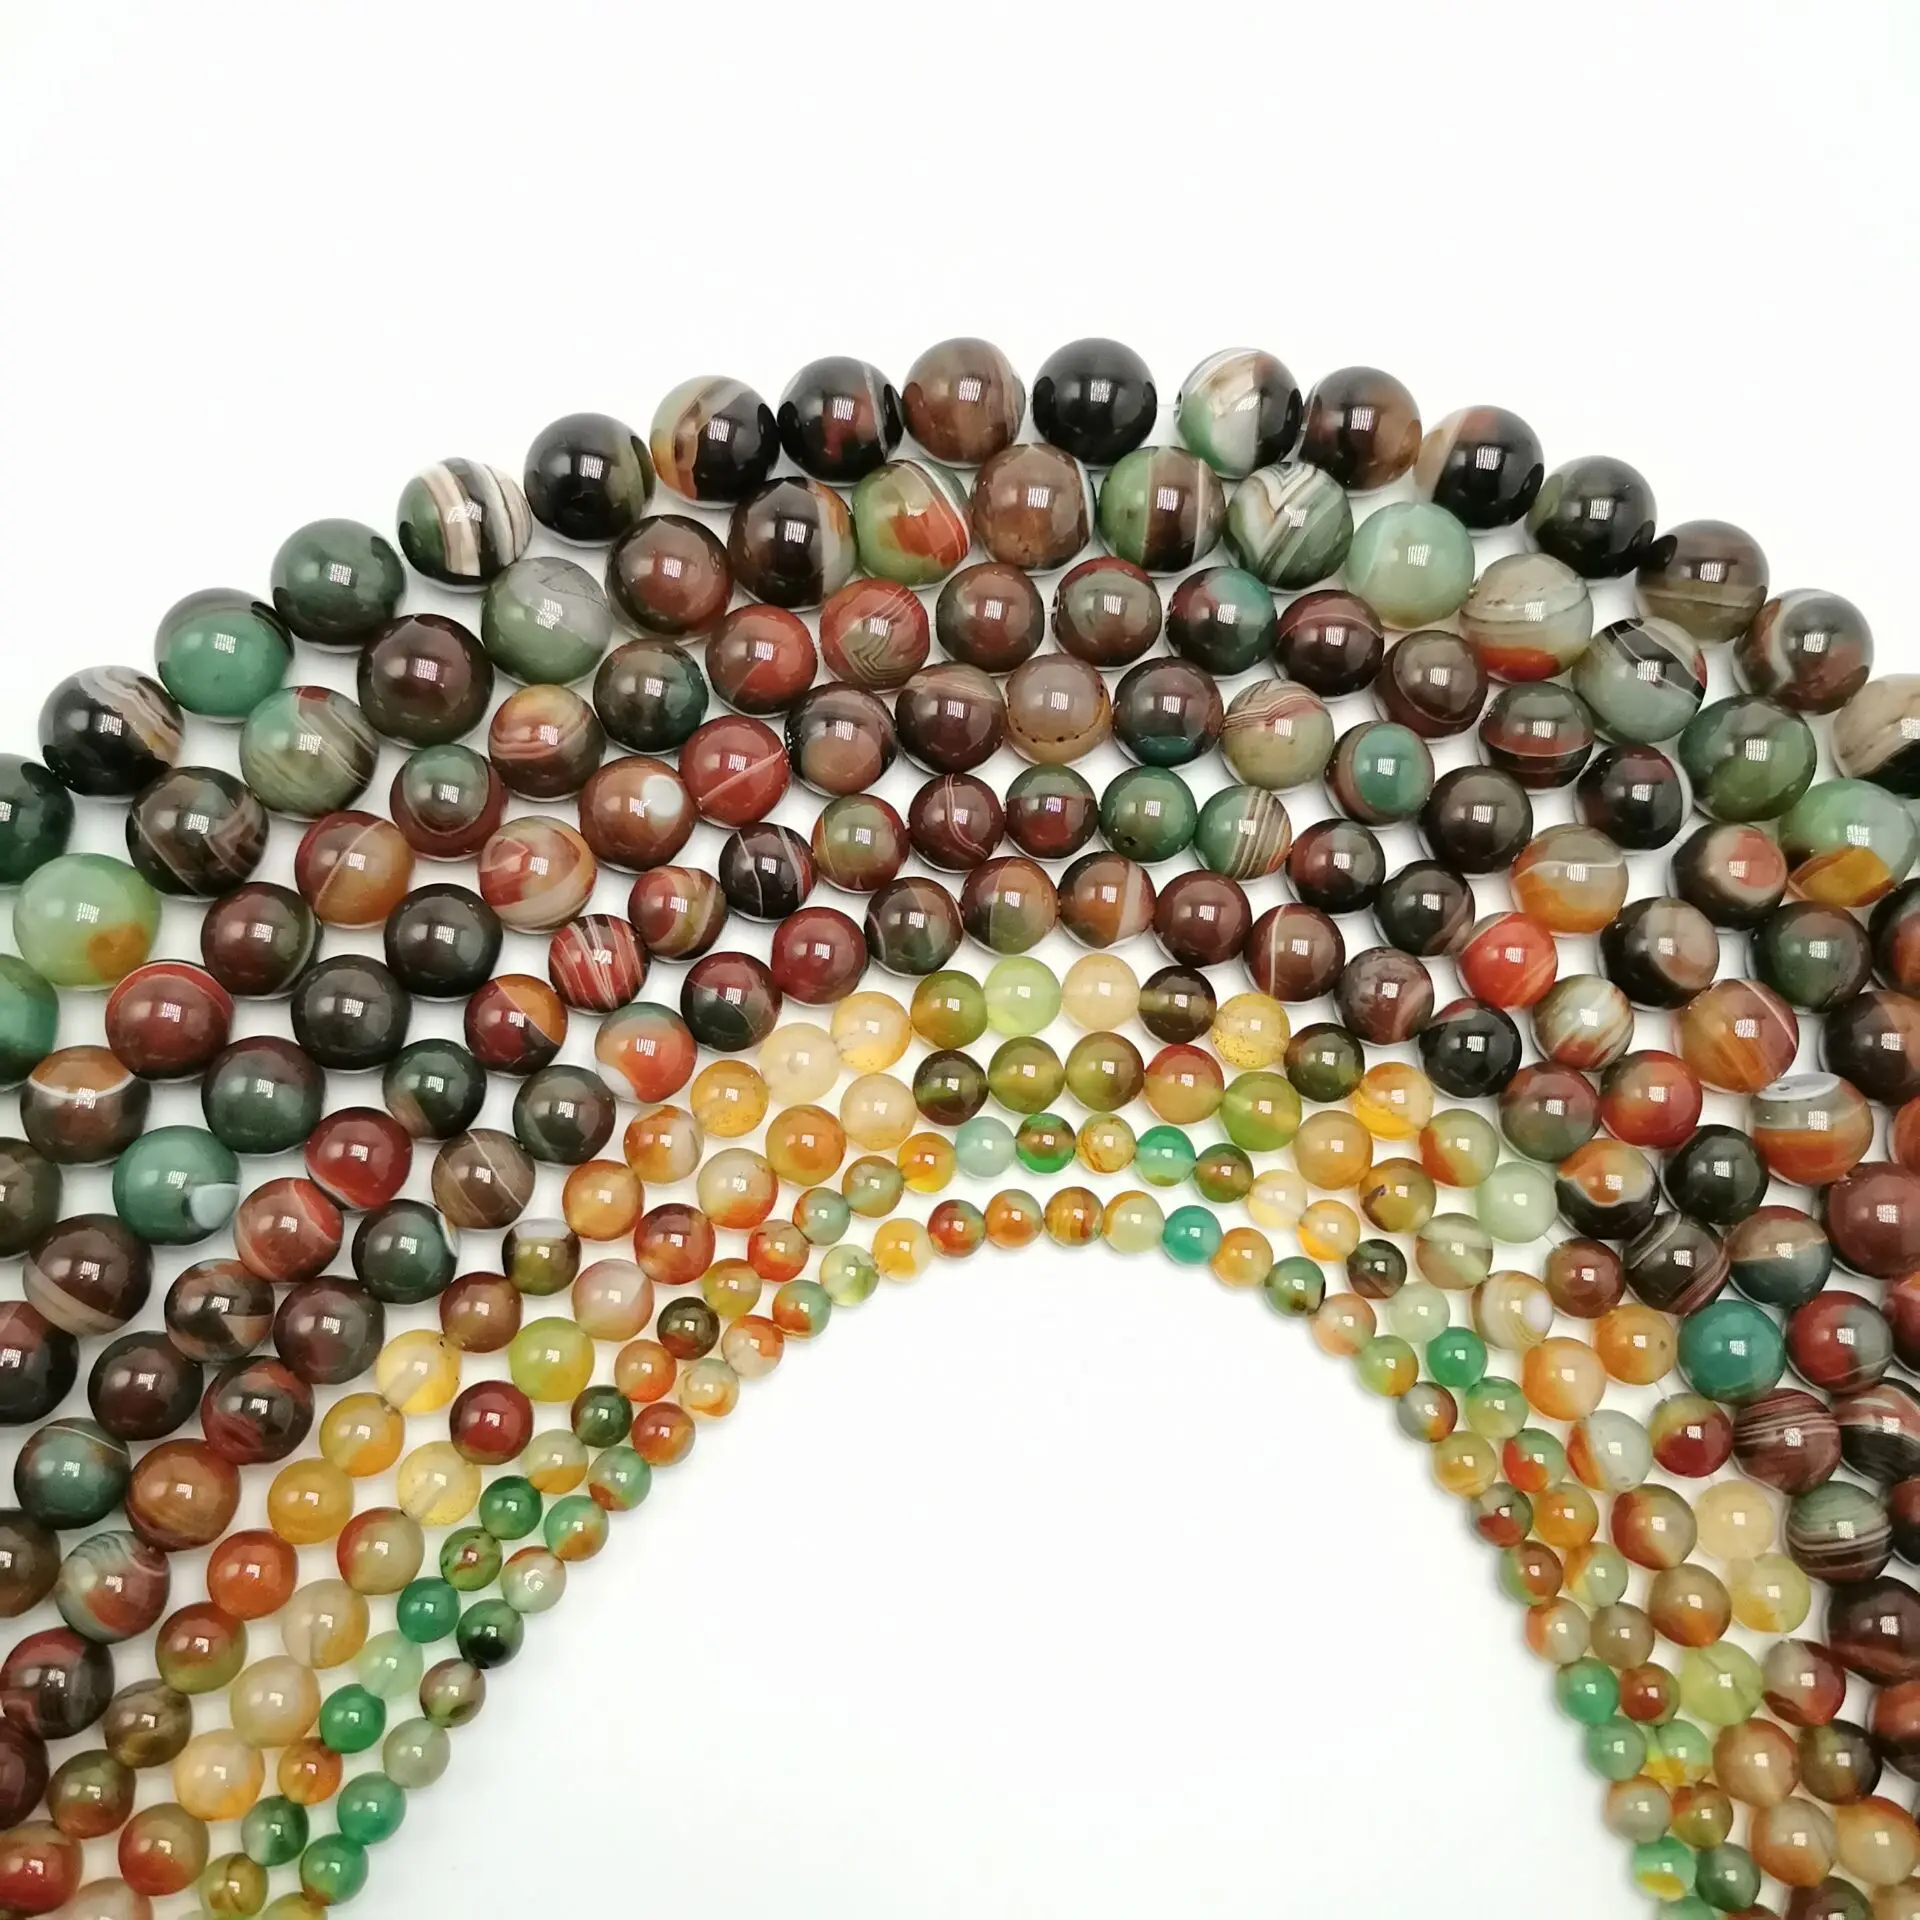 Wholesale Mix Color Peacock Agat Natural Stone Beads For Jewelry Making DIY Bracelet Necklace 6/8/10/12 mm Strand 15'